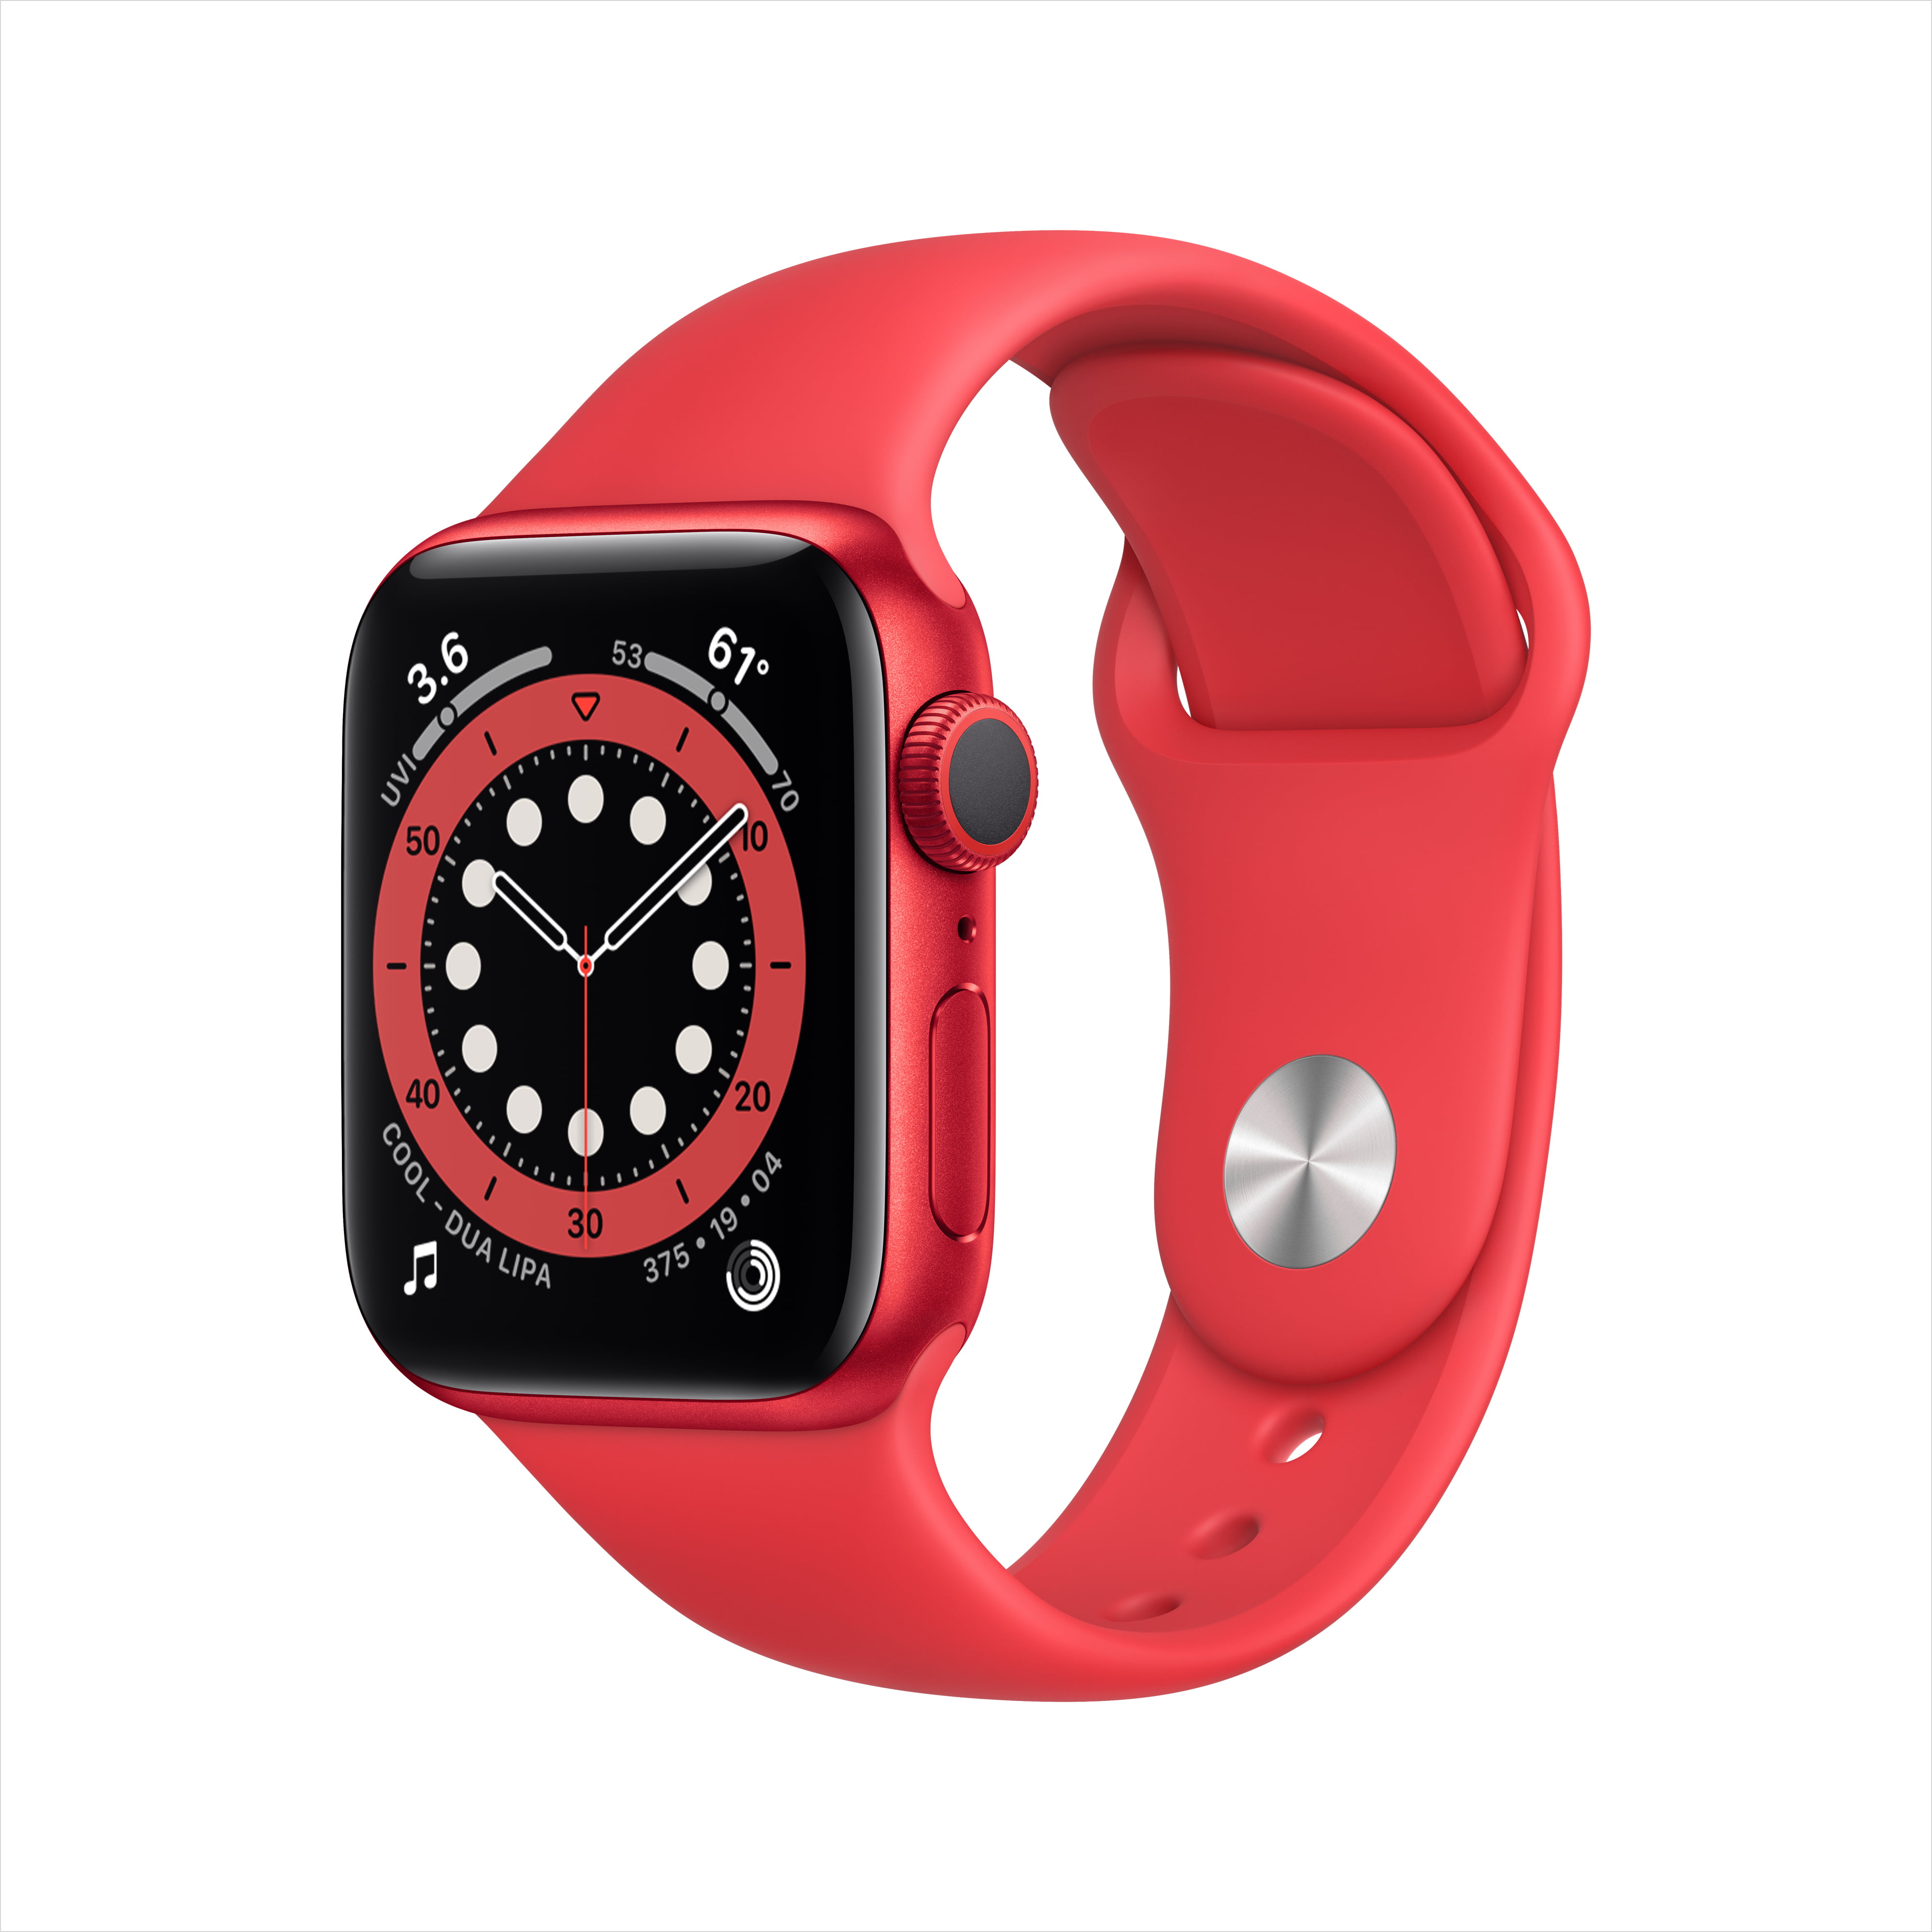 Apple Watch Series 6 GPS, 44mm PRODUCT(RED) Aluminum Case with PRODUCT(RED)  Sport Band - Regular - Walmart.com